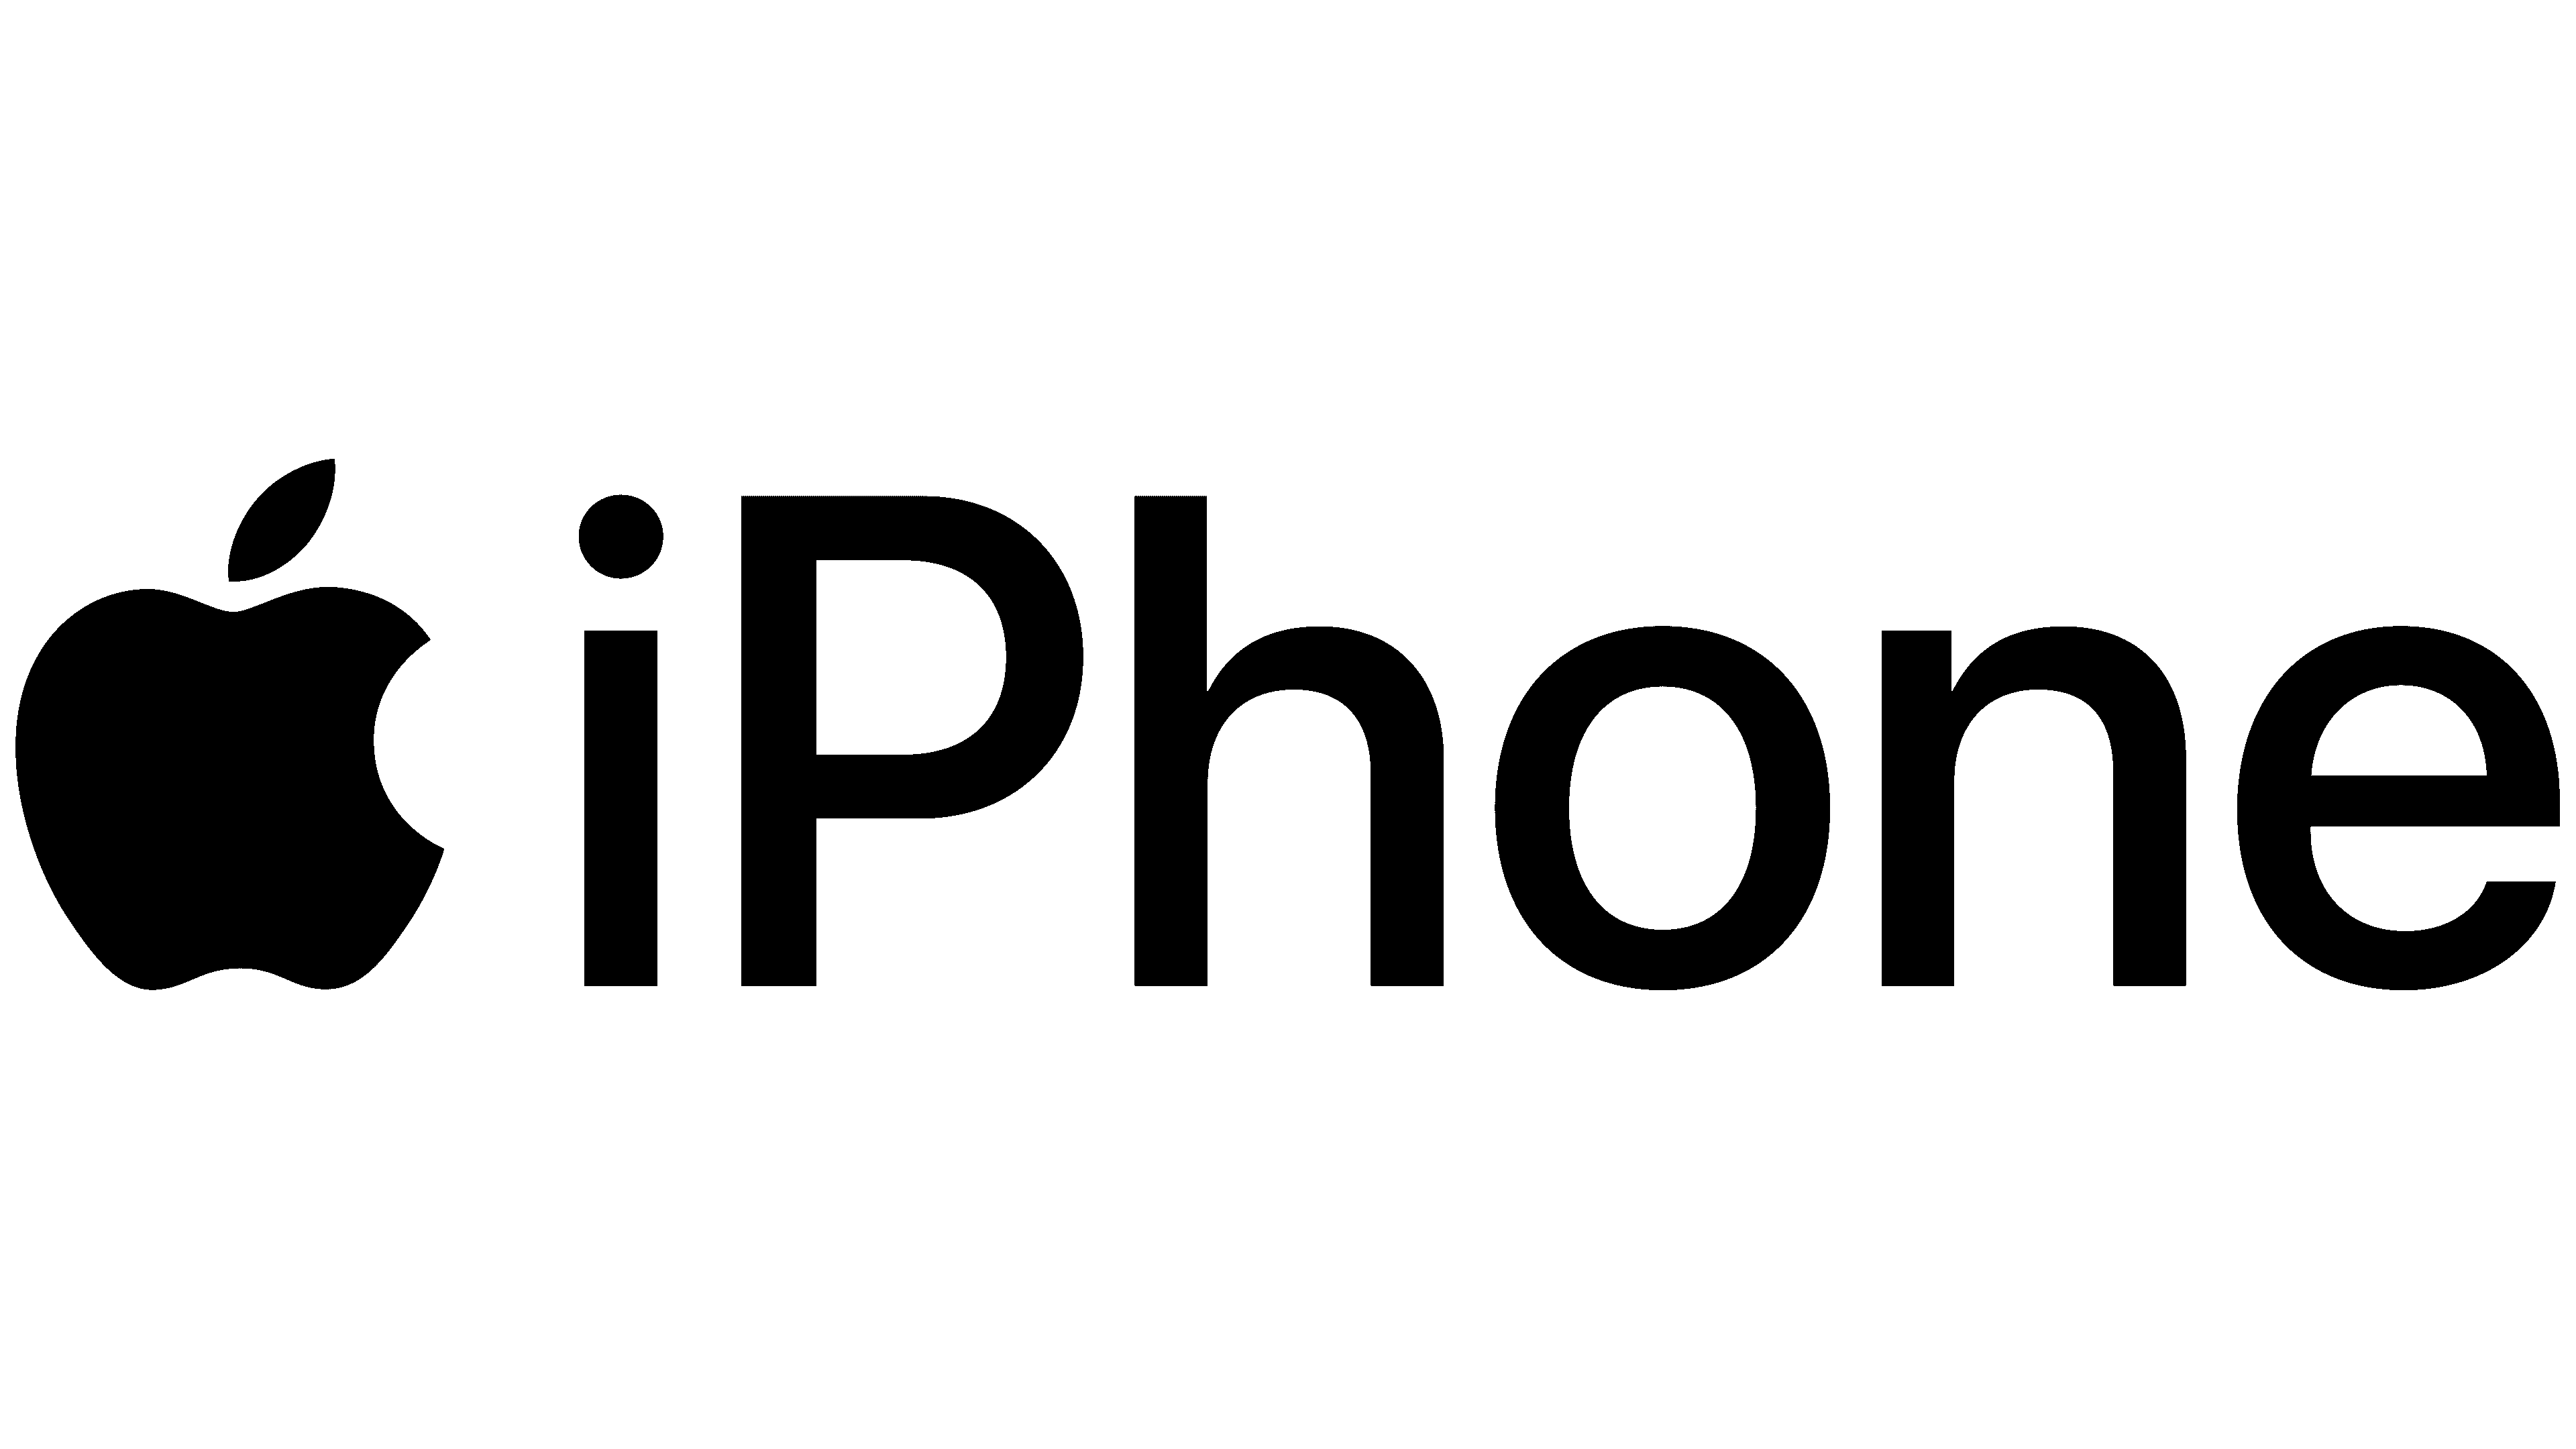 Ipone Logo PNG Vector (EPS) Free Download